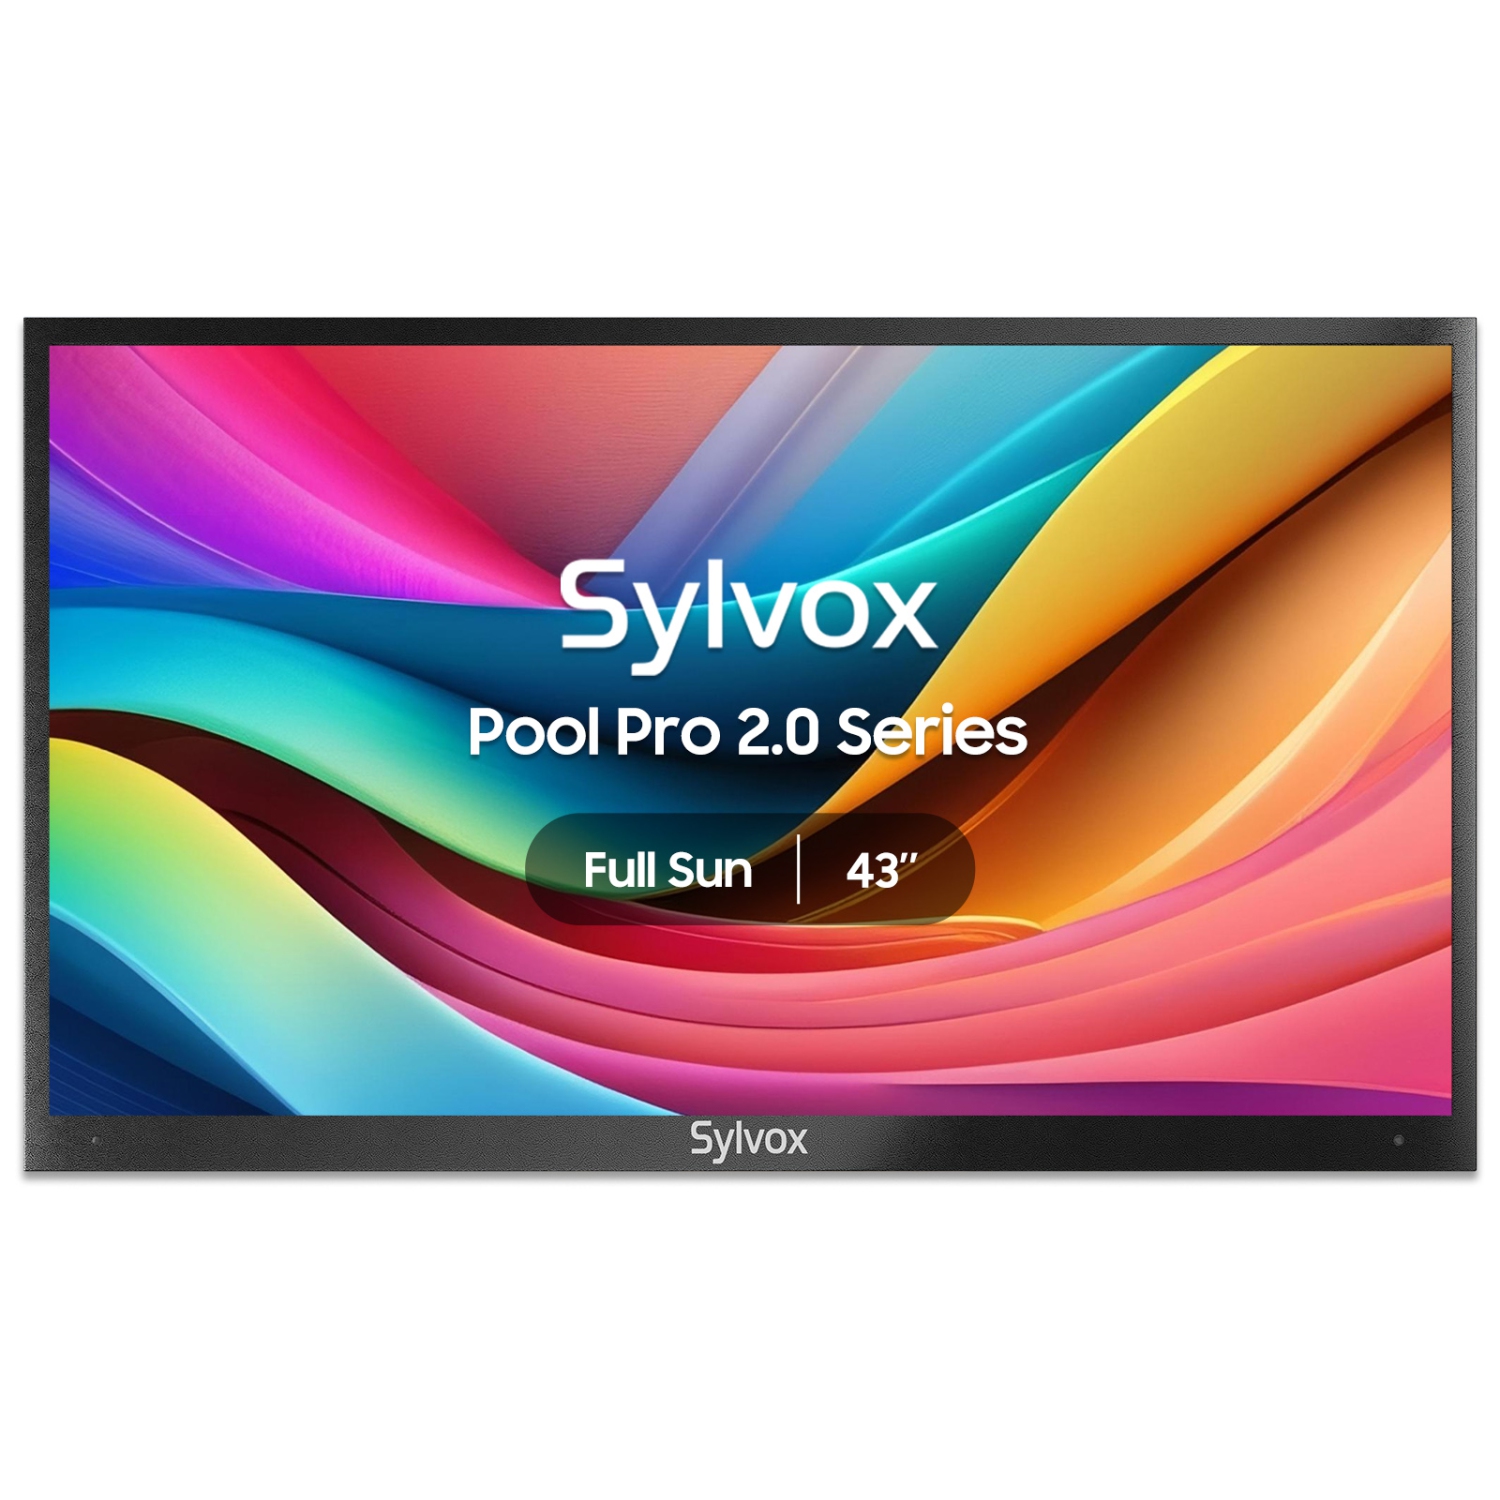 SYLVOX Outdoor TV, 43" Full Sun Smart Outdoor TV, IP55 Waterproof, Voice Remote, 2000nits Weatherproof Television, Google Assistant Chromecast(Pool Pro 2.0)